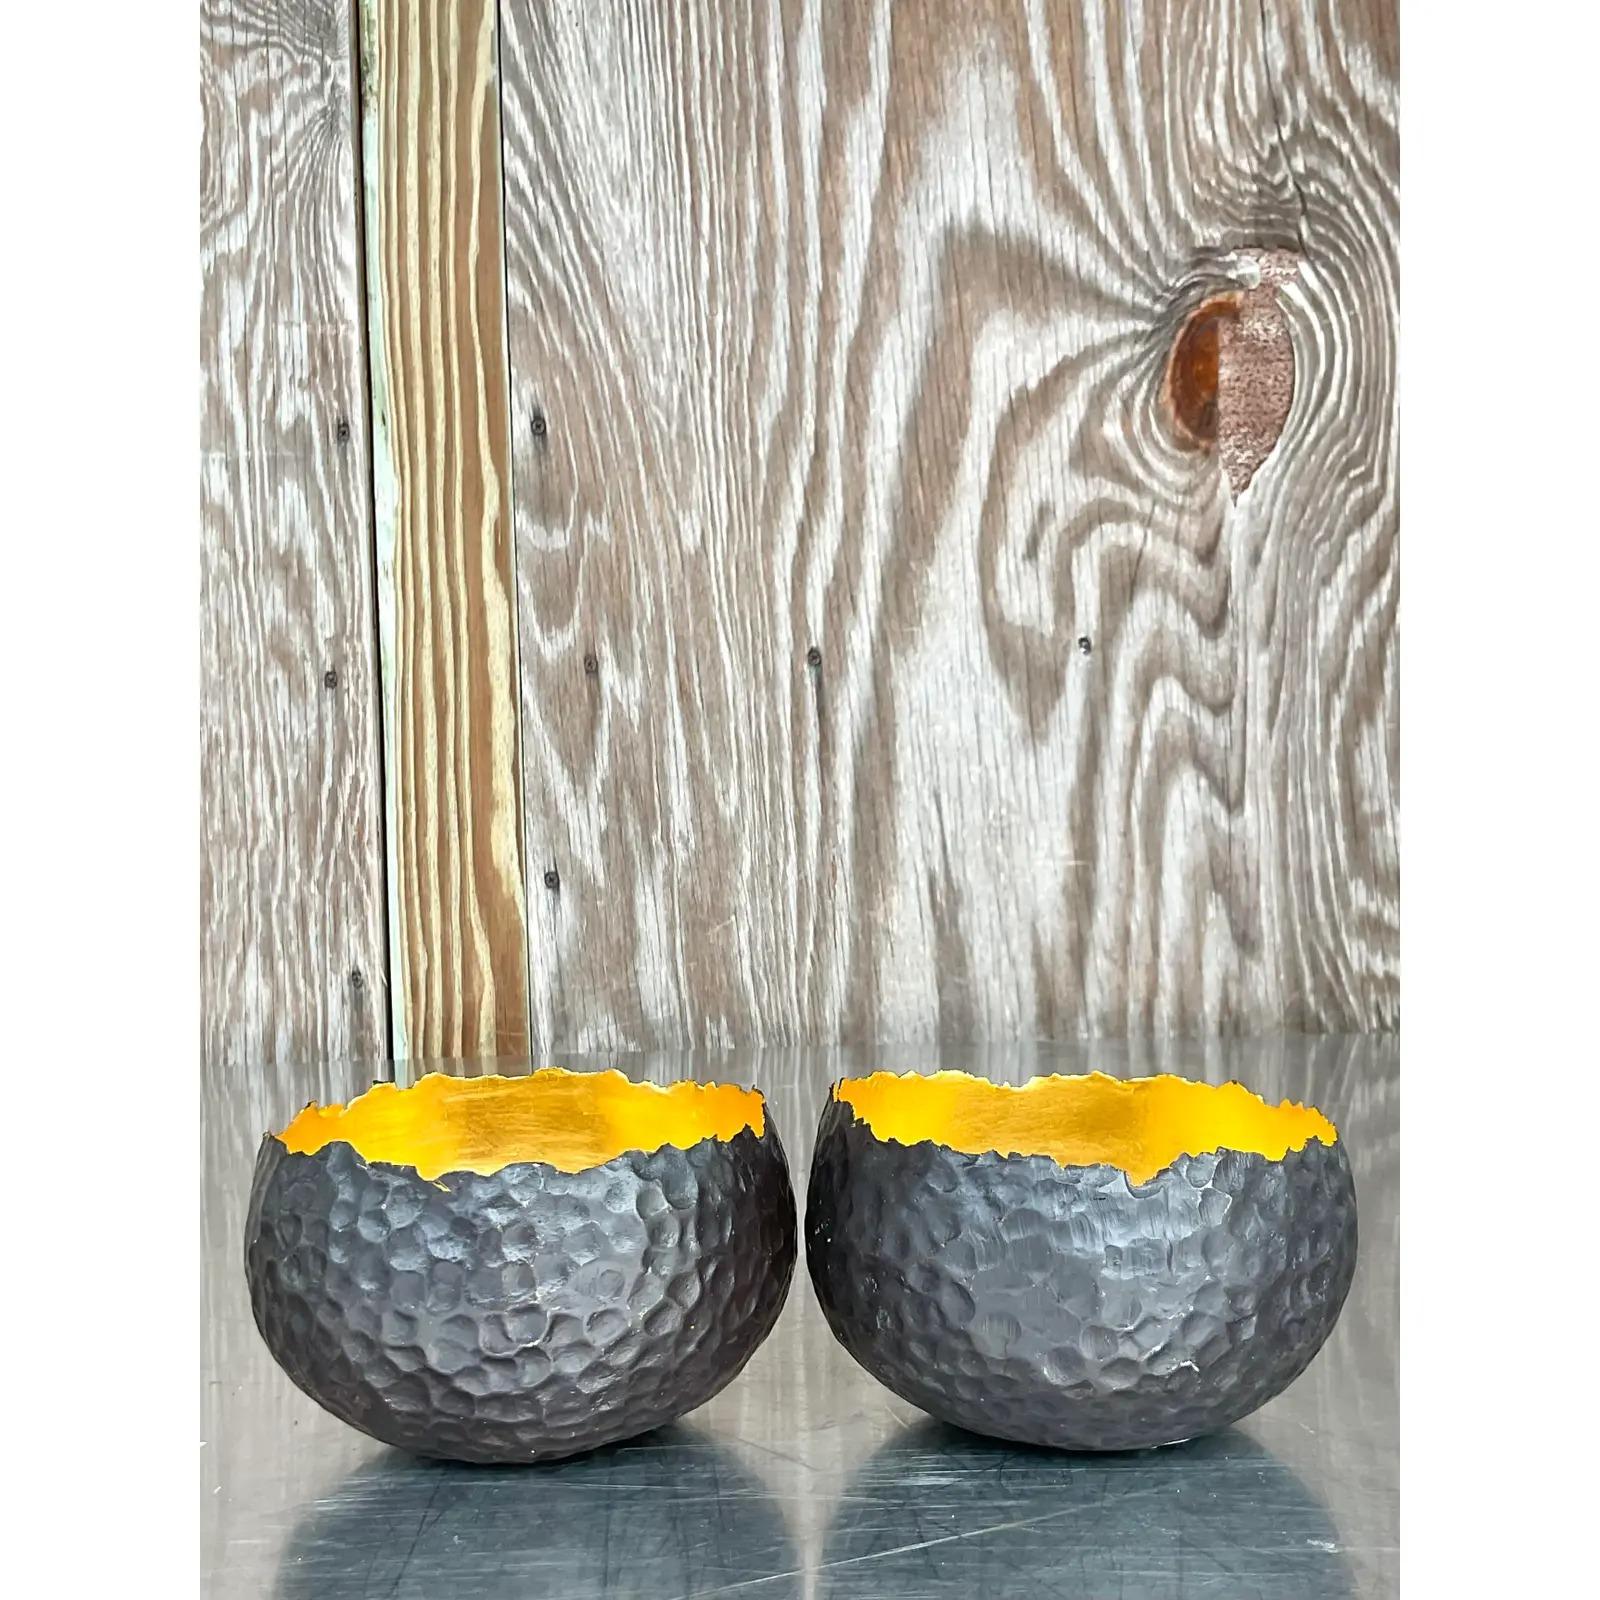 A spectacular pair of vintage contemporary Alexander Lamont bowls. Beautiful hand hammered brown eyes lined with glowing gold interior. Acquired from a Palm Beach estate.